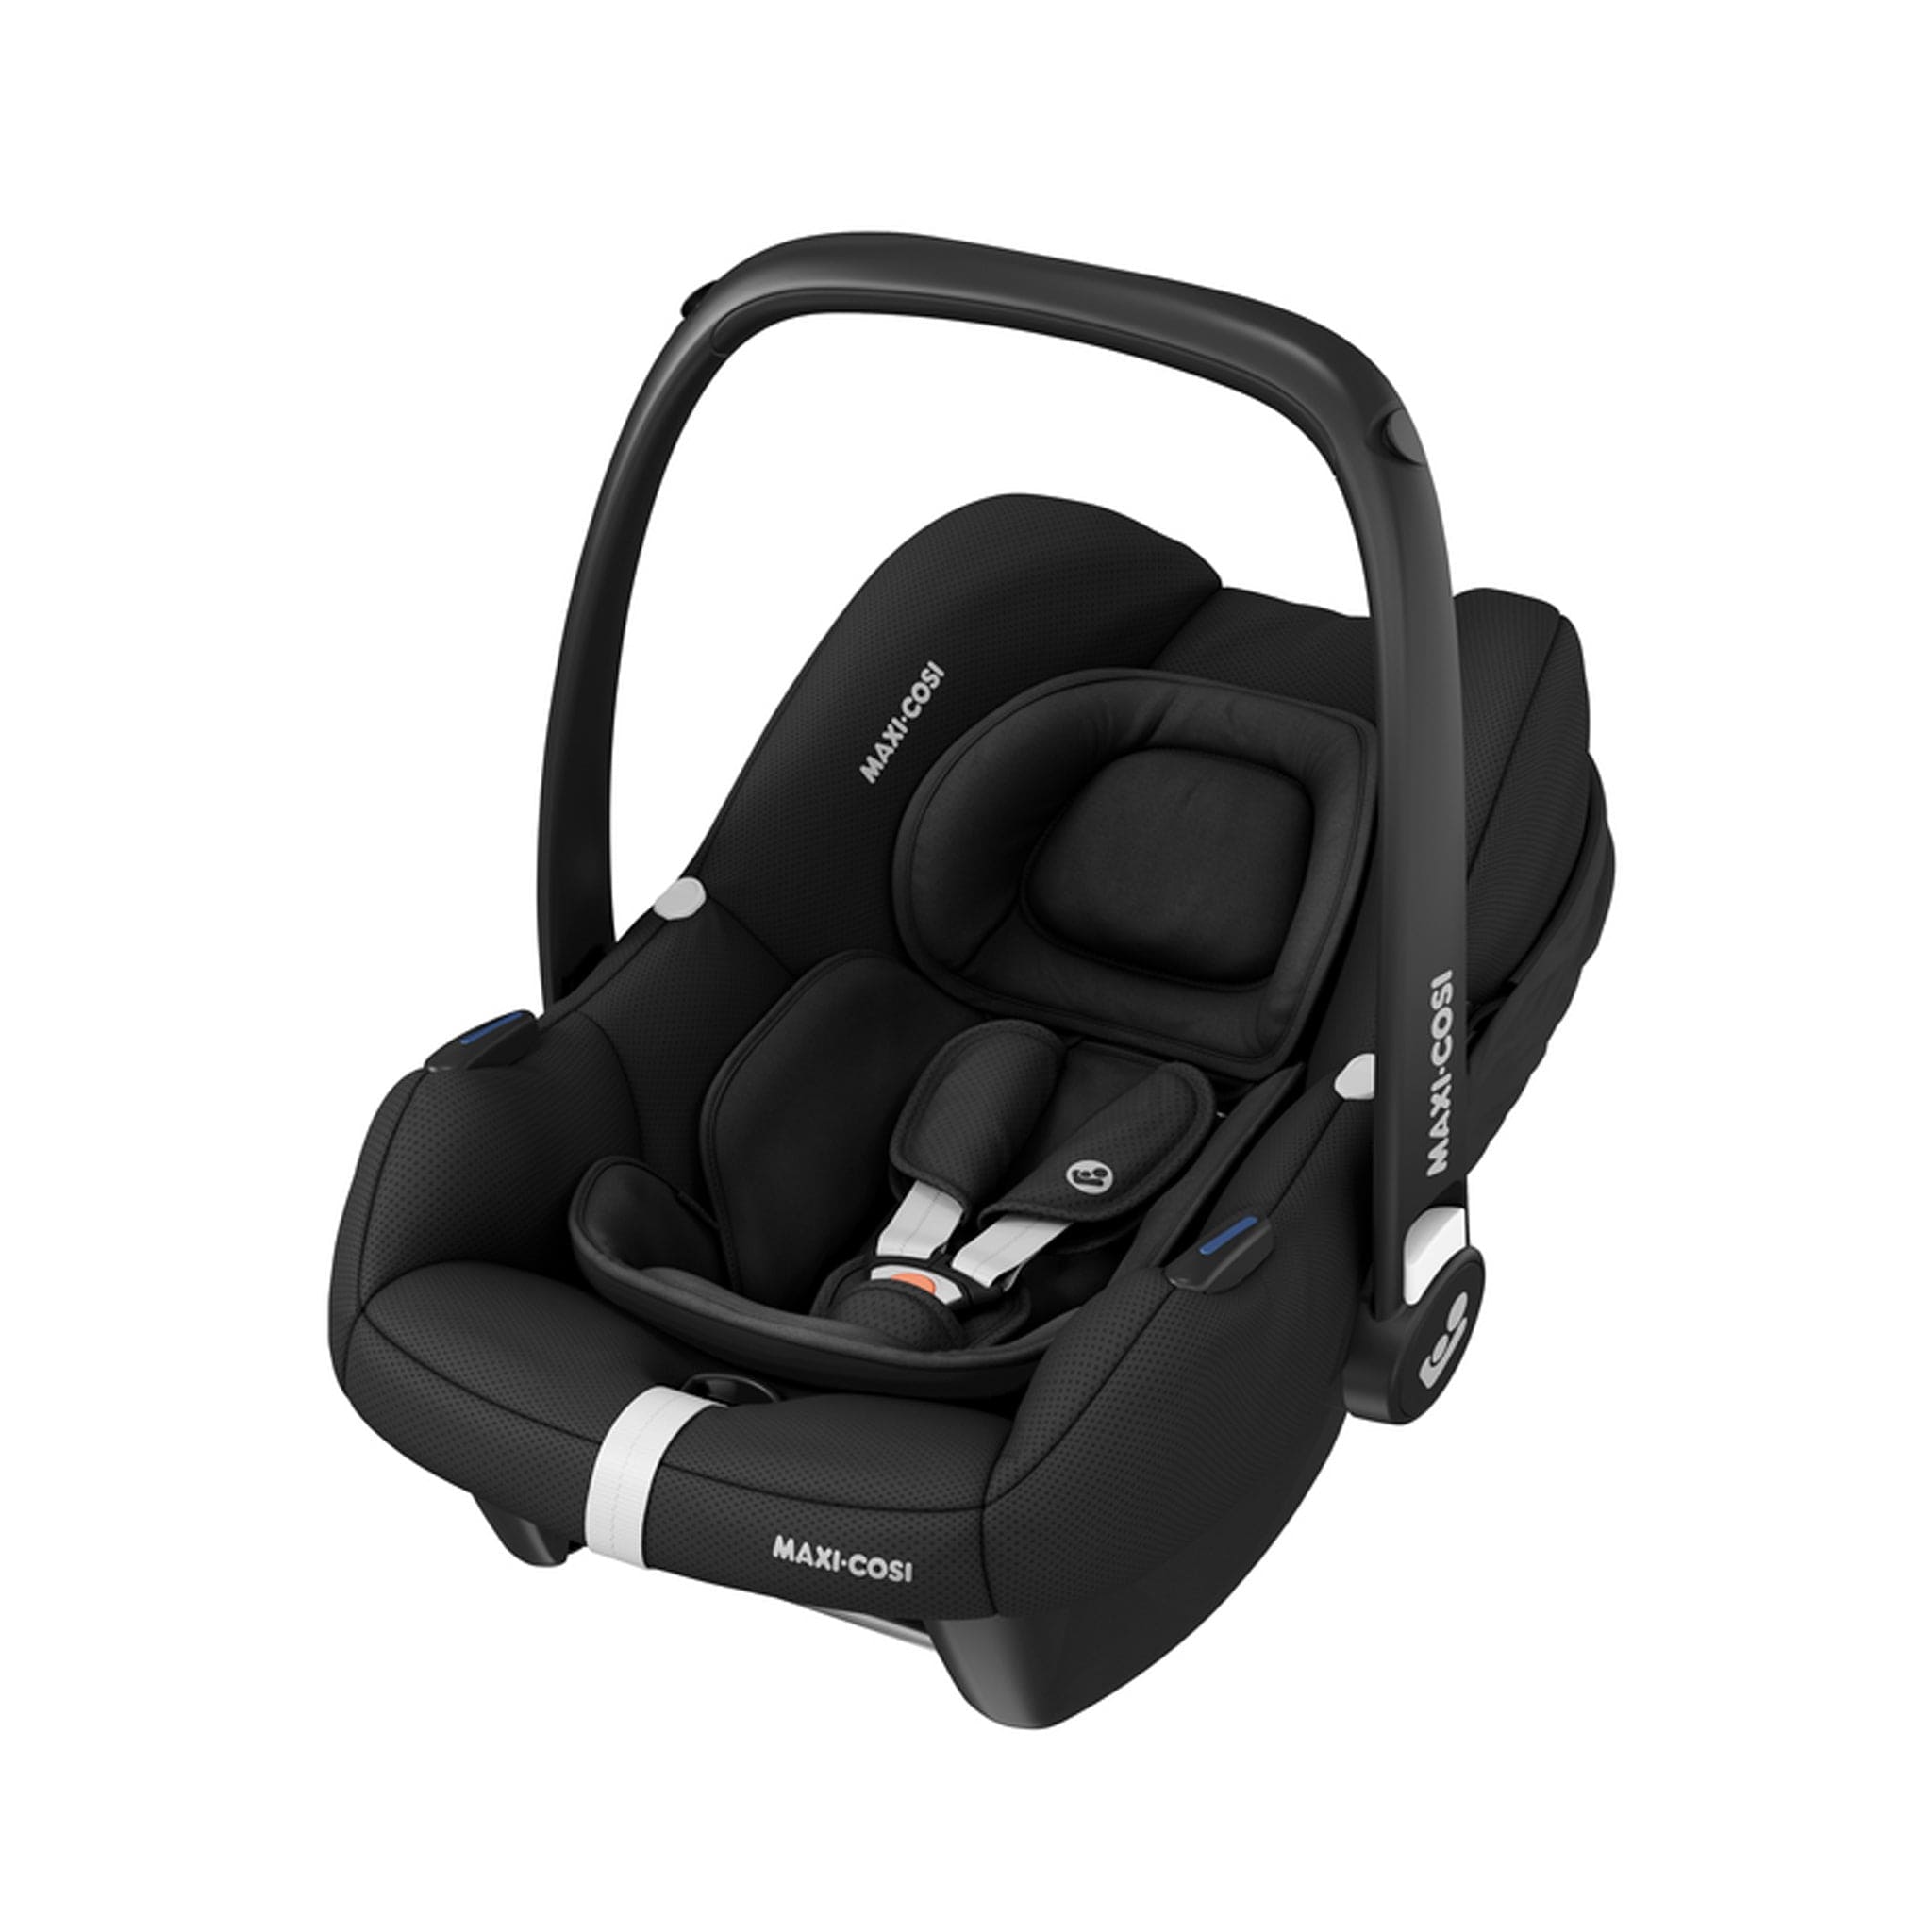 Maxi-Cosi travel systems Maxi-Cosi Zelia Luxe with Cabriofix i-Size & Base Travel System in Twillic Truffle